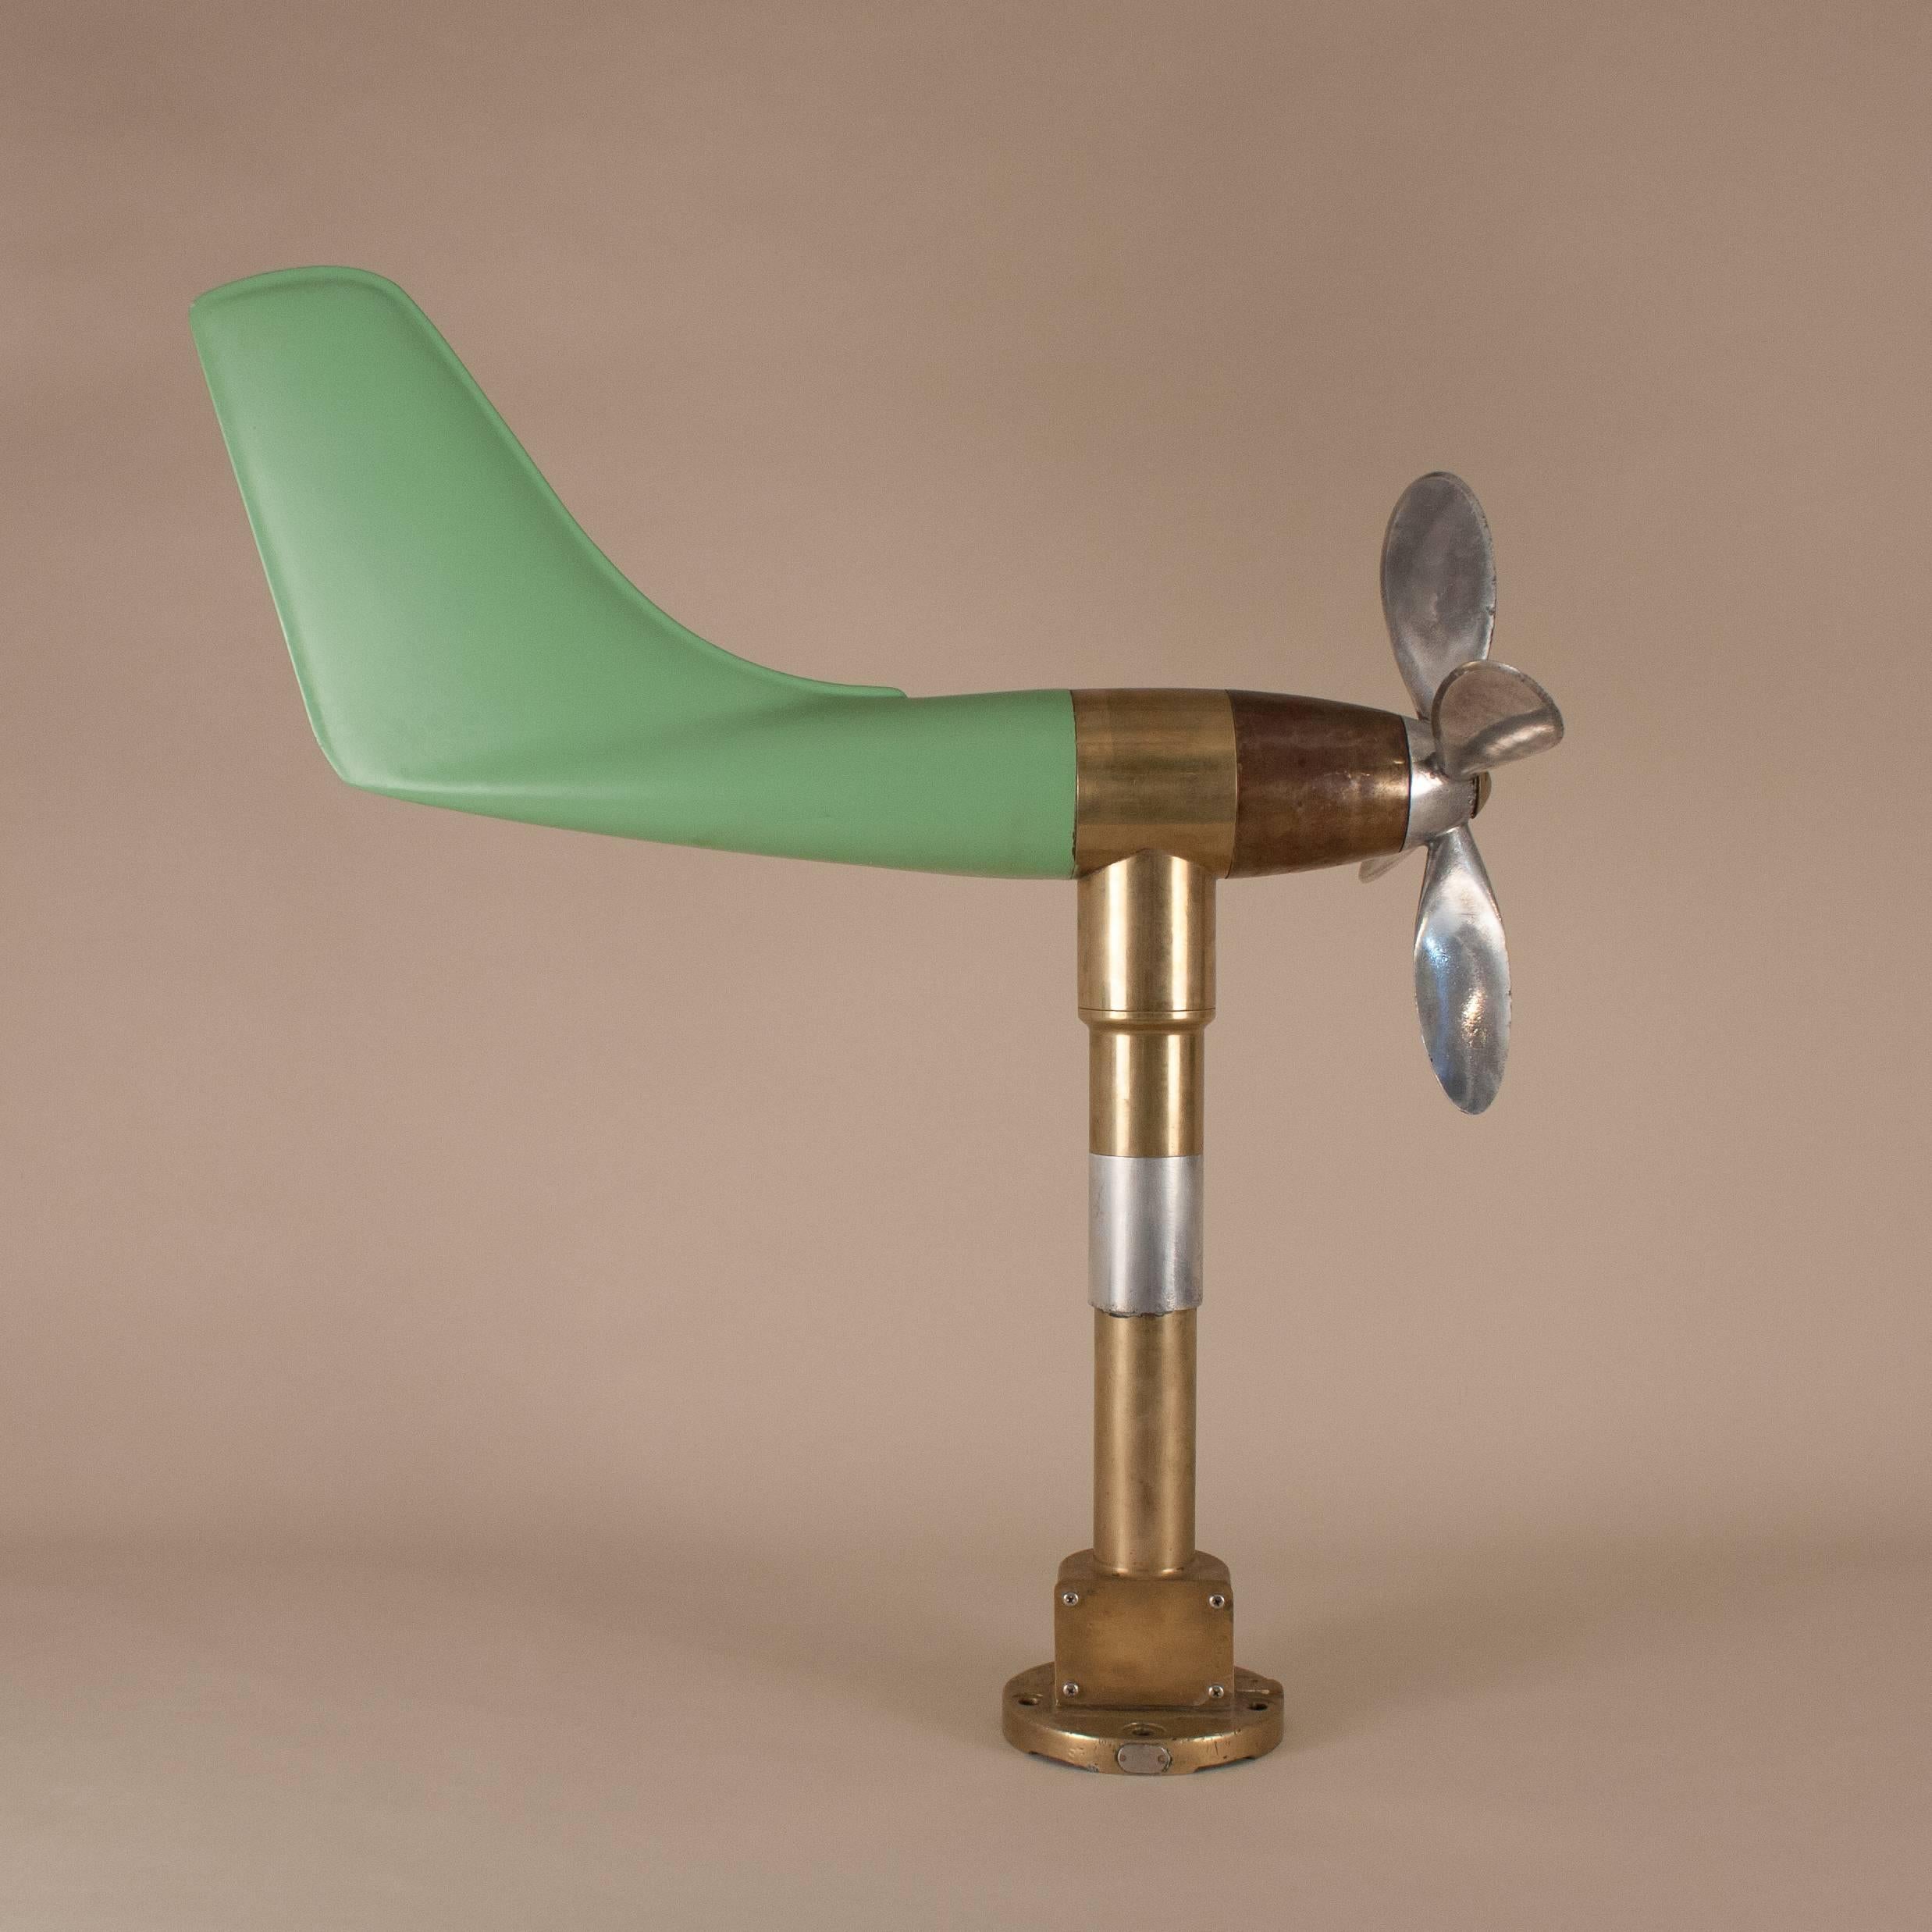 This vintage anemometer, originally wired and used to measure wind speed and direction on an airfield or ship, now makes a delightful Kinetic sculpture. Whether wind- or manually-driven, the aluminum propeller, brass shaft and re-painted fiberglass